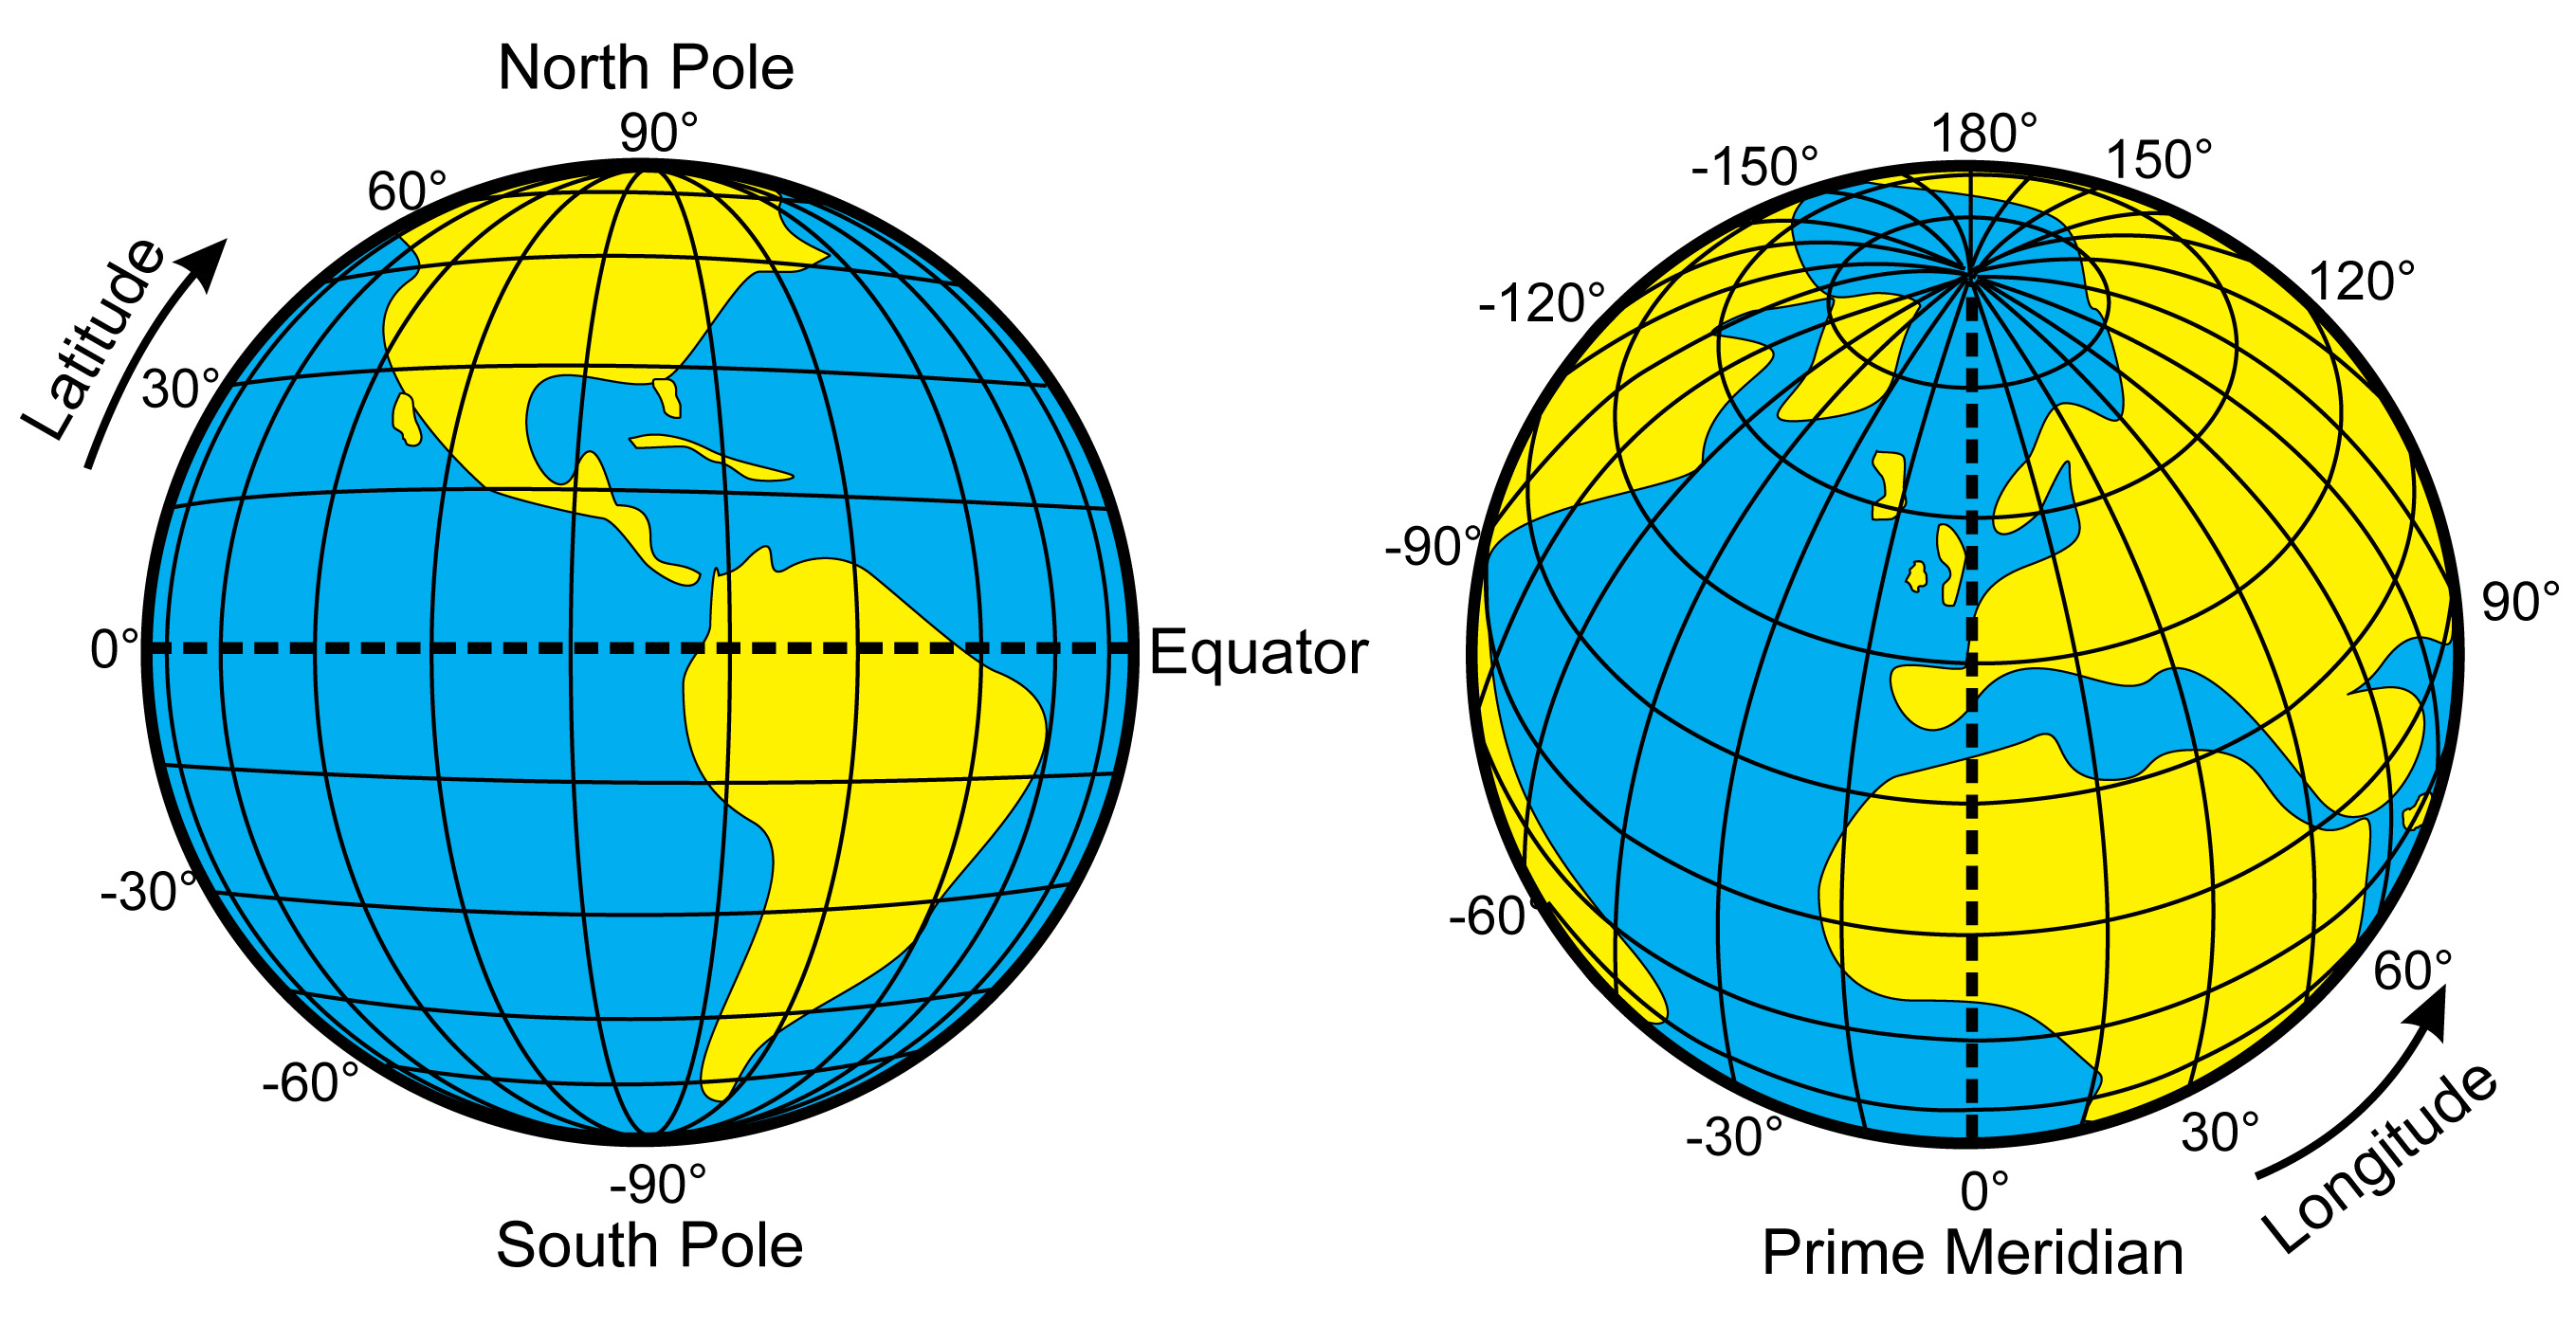 "File:Latitude and Longitude of the Earth.svg" by Djexplo is licensed under CC0 1.0